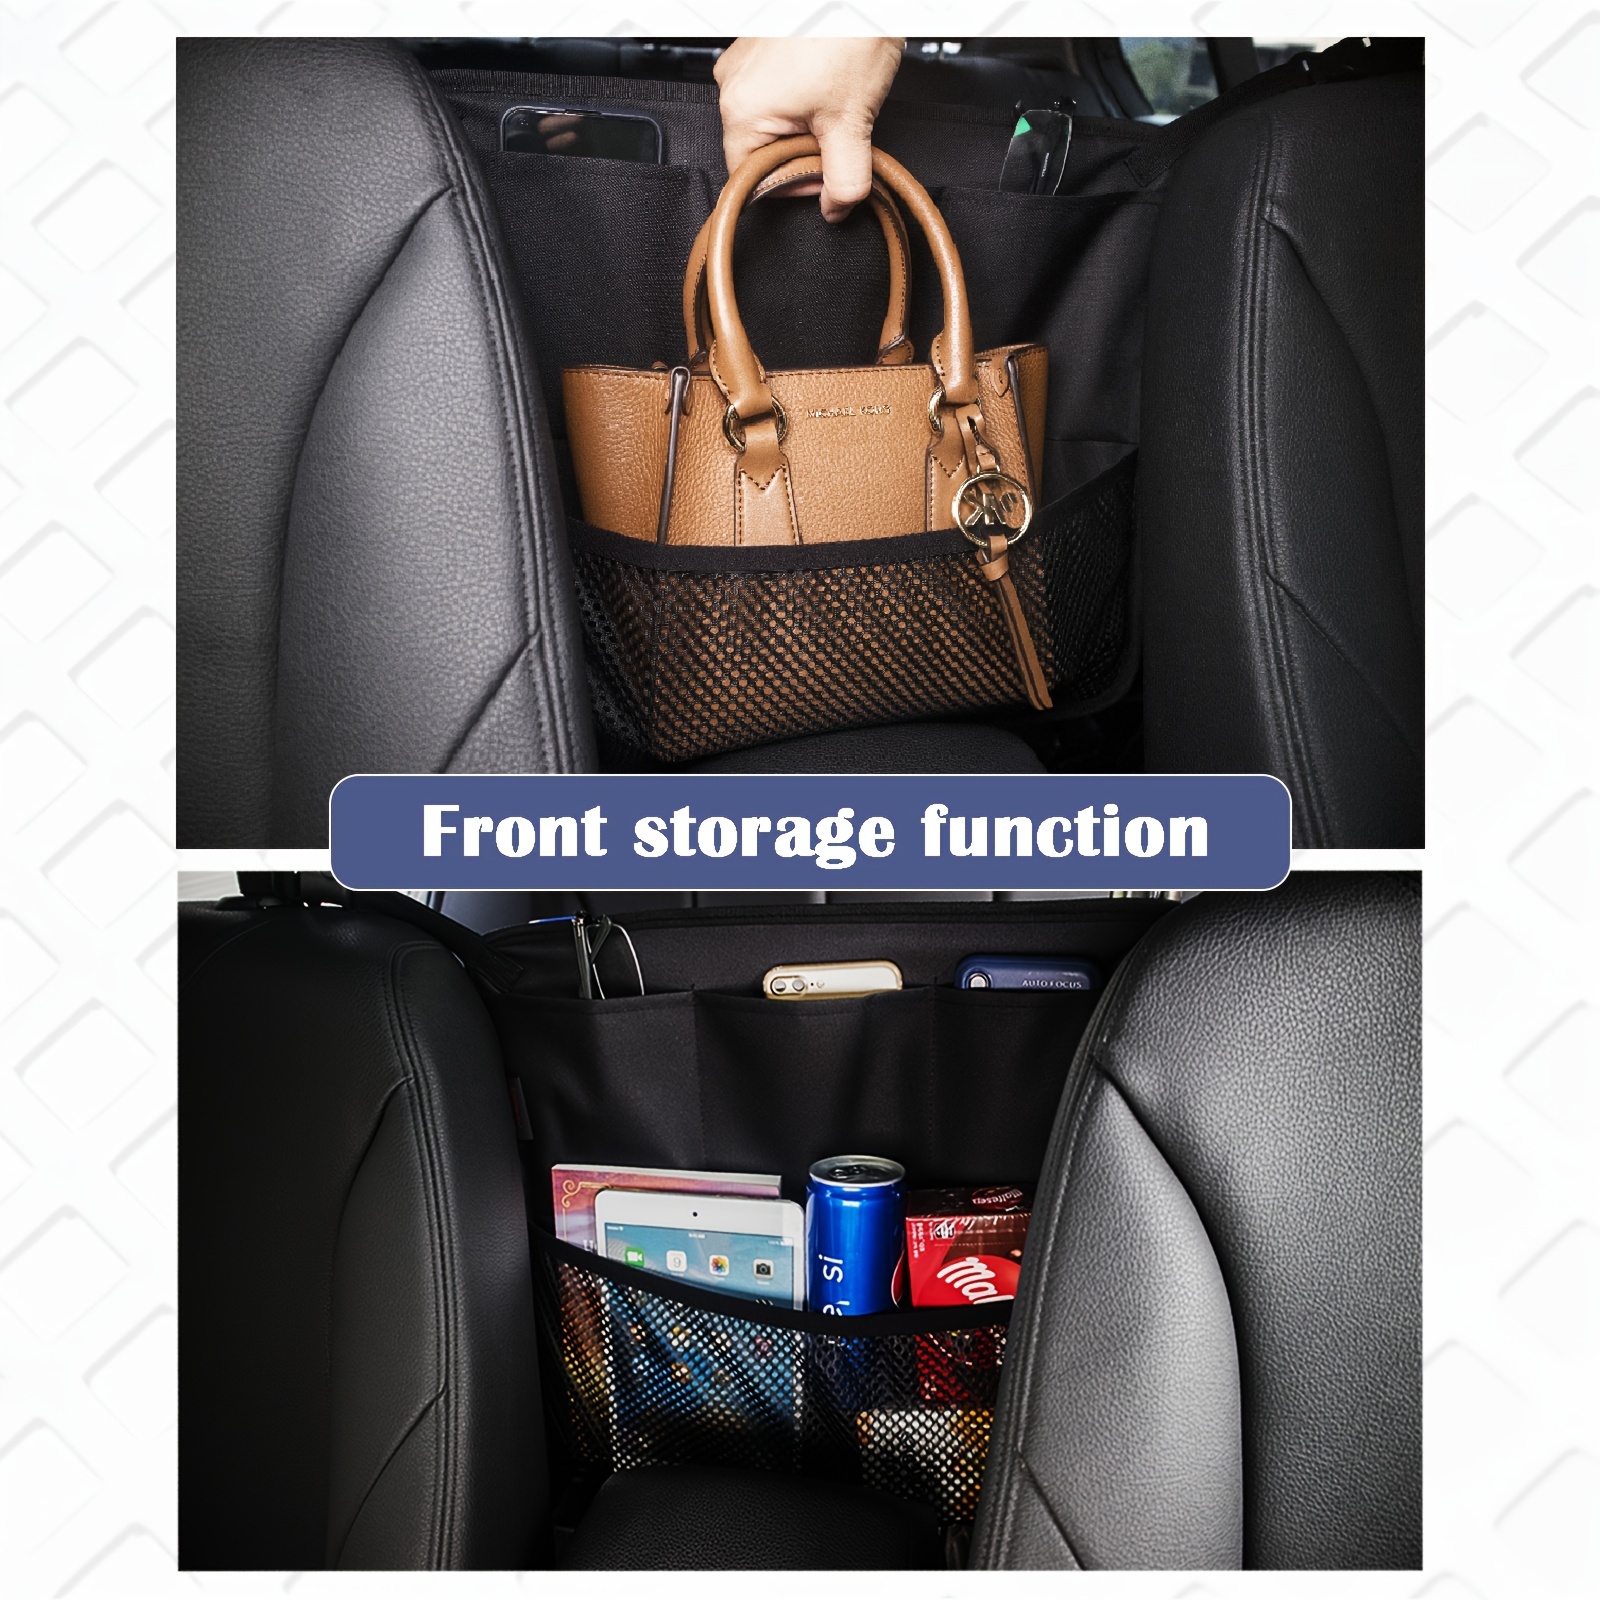 Car Trash Bag Garbage Can, Recycle Bin For Rubbish Waster, Organizer  Storage Container Between Front Seats, Holder Of Handbag Purse Car  Accessories